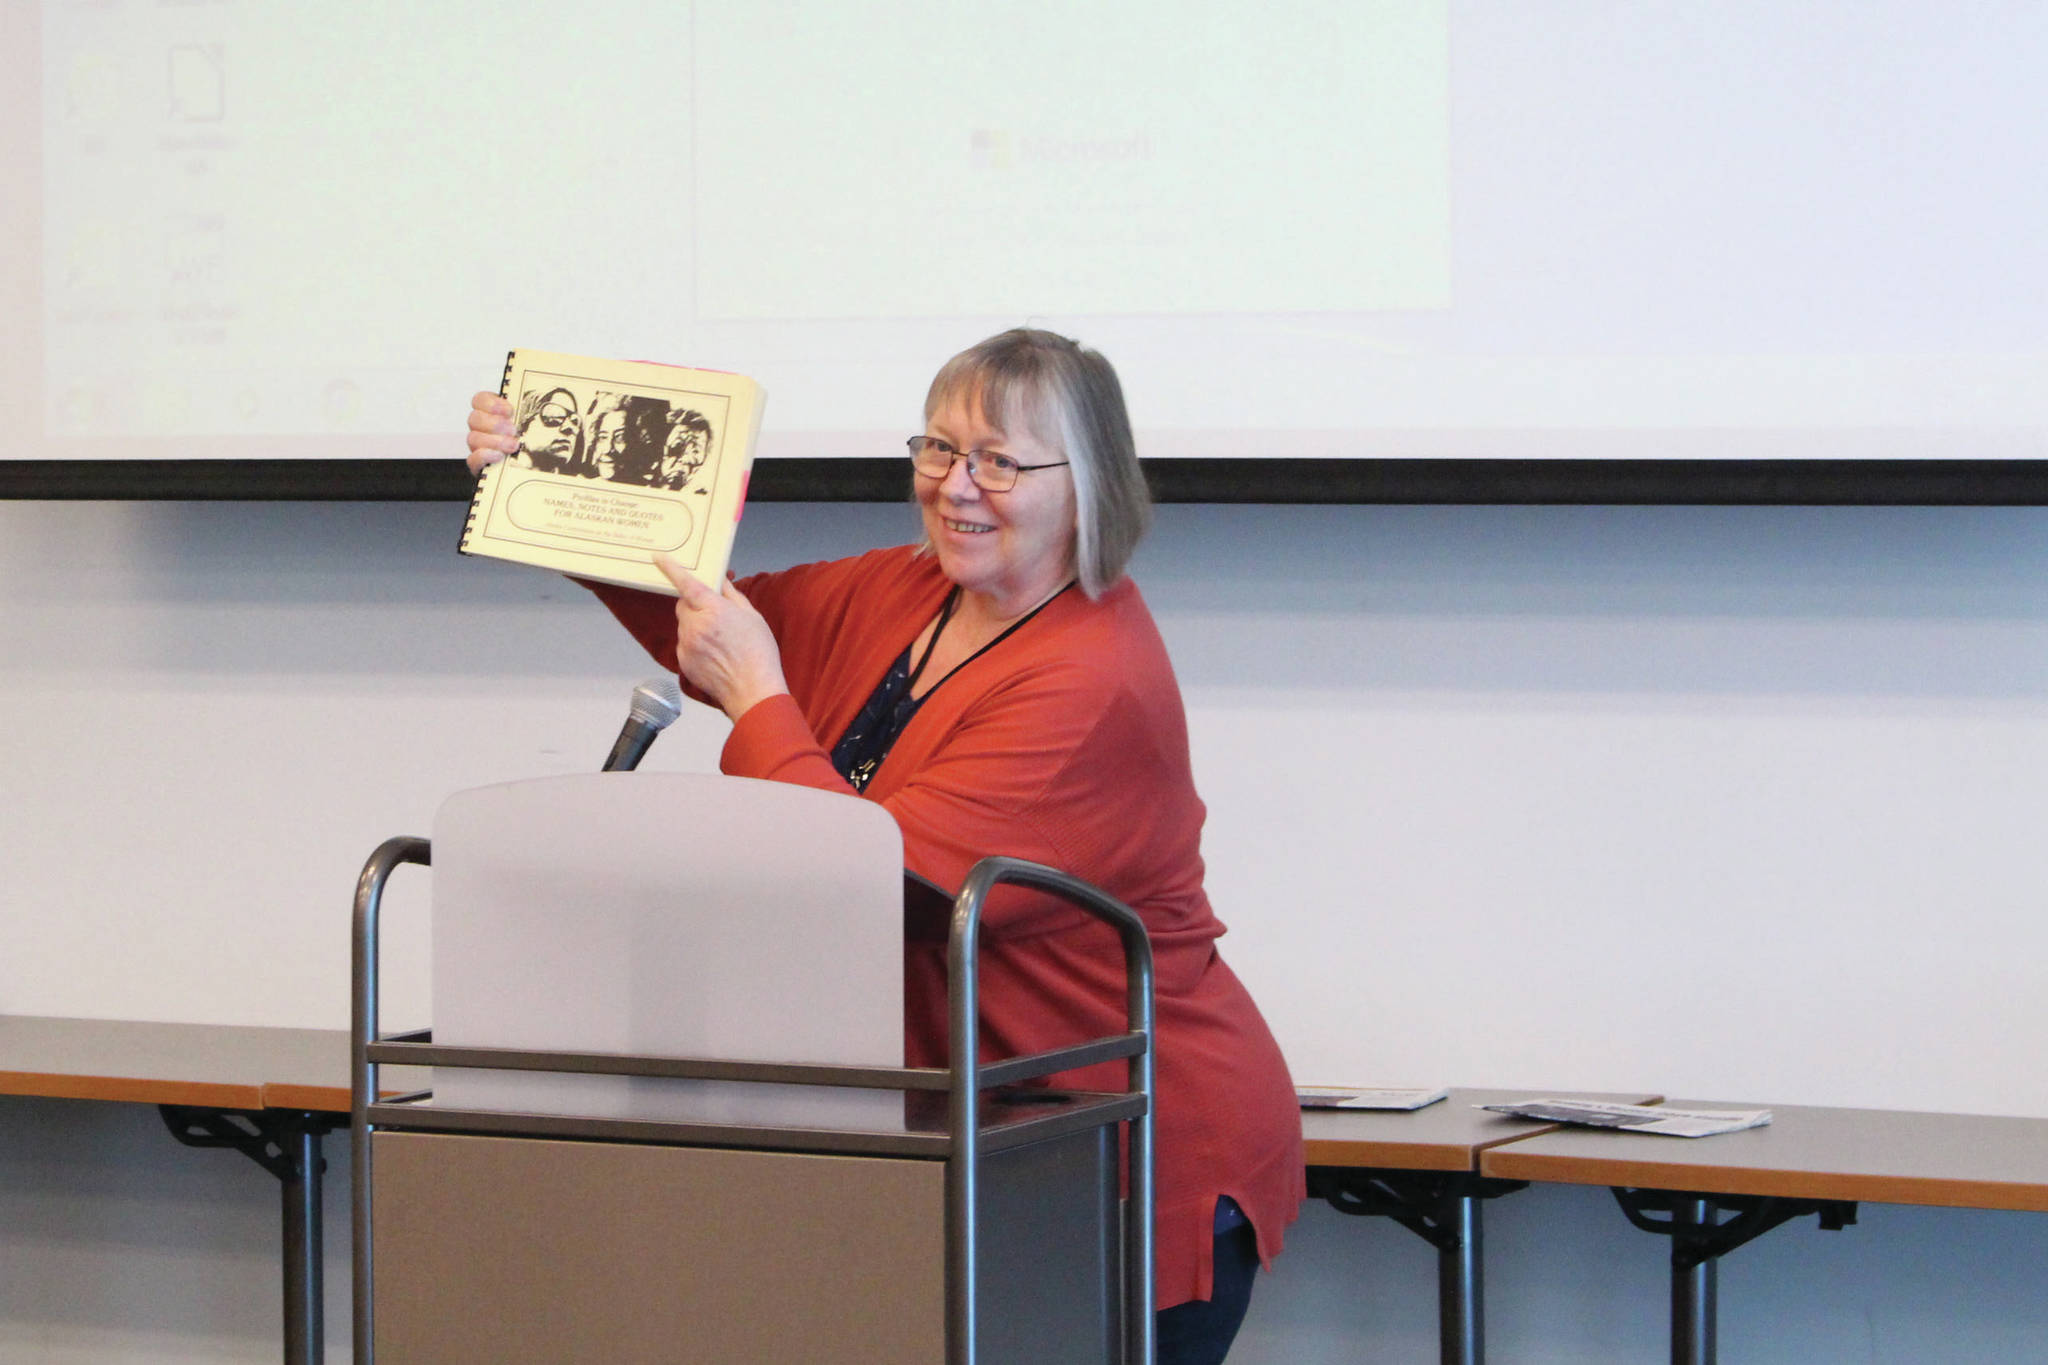 Brian Mazurek / Peninsula Clarion                                Barbara Waters holds up the book “Profiles in Change: Names, Notes, and Quotes for Alaskan Women” by Ginna Brelsford while discussing women’s history in Alaska during the Centennial Voices event at the Soldotna Public Library in Soldotna on Saturday.